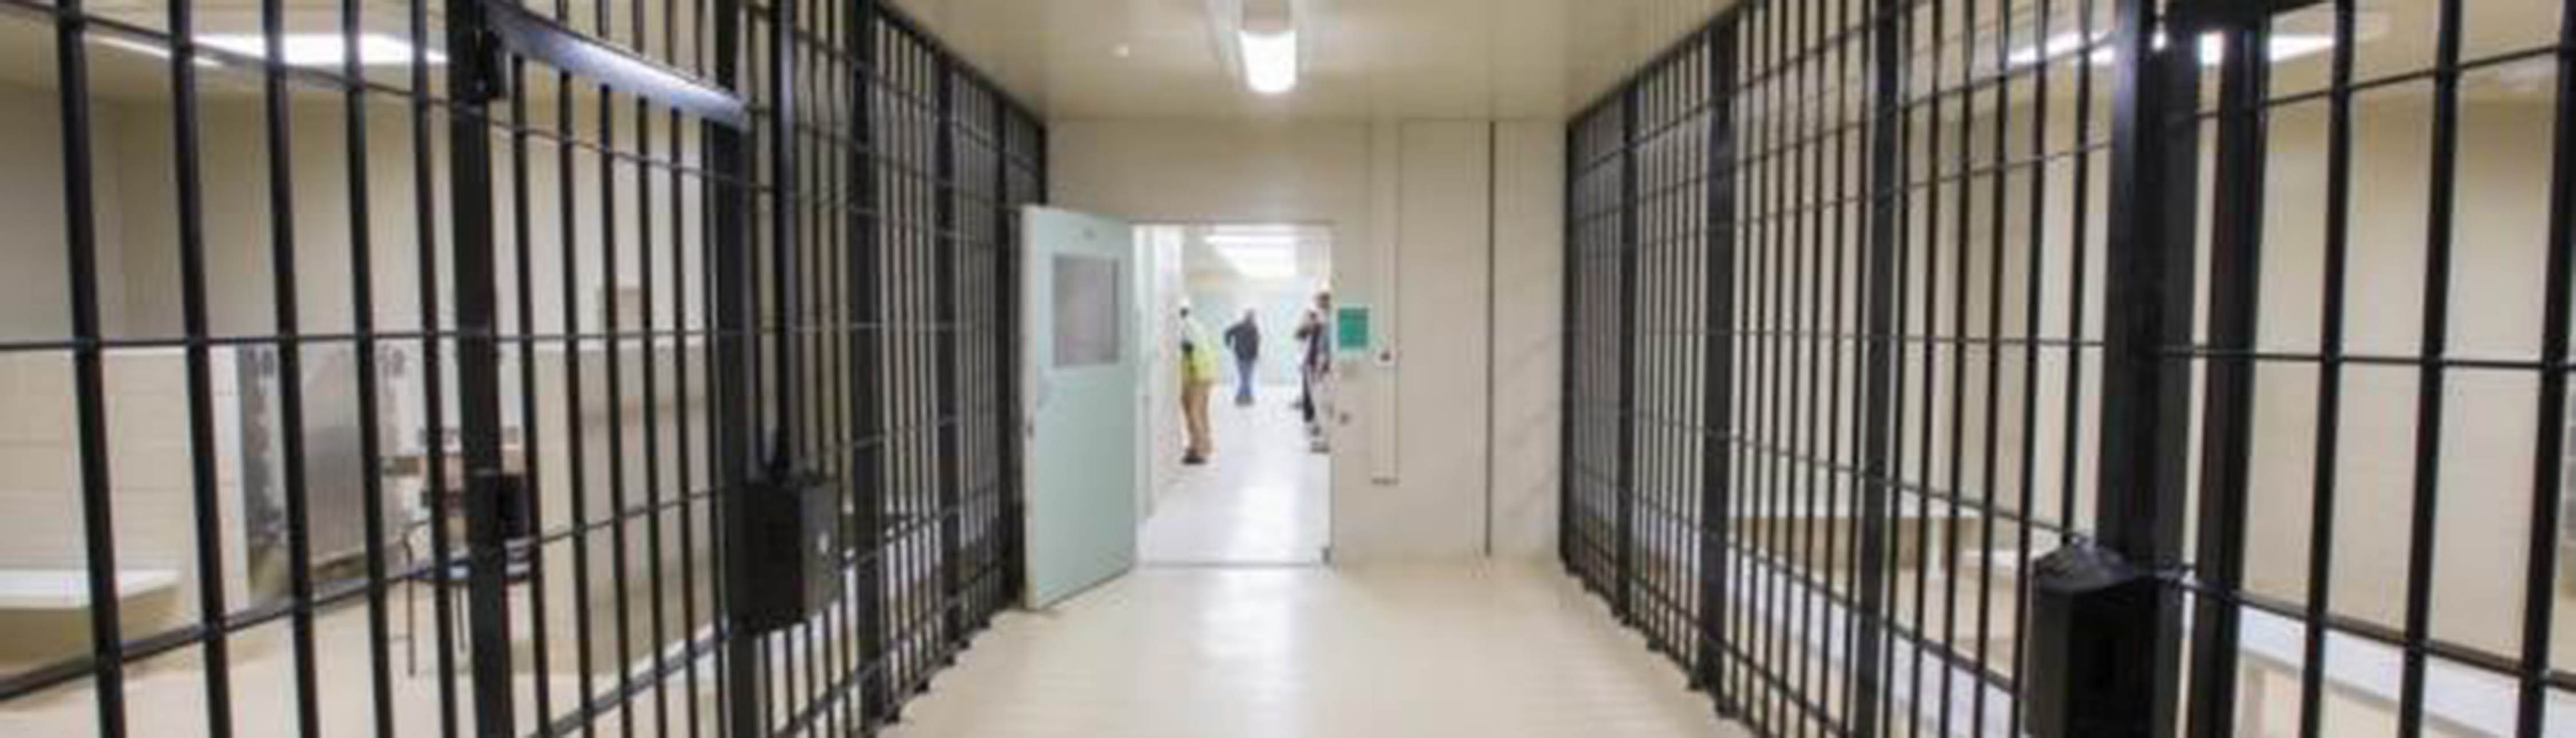 Looking down a hallway in a jail. Cell bars line either side of the hallway. at the end of the hallway there is an open door where you can see people walking and standing.